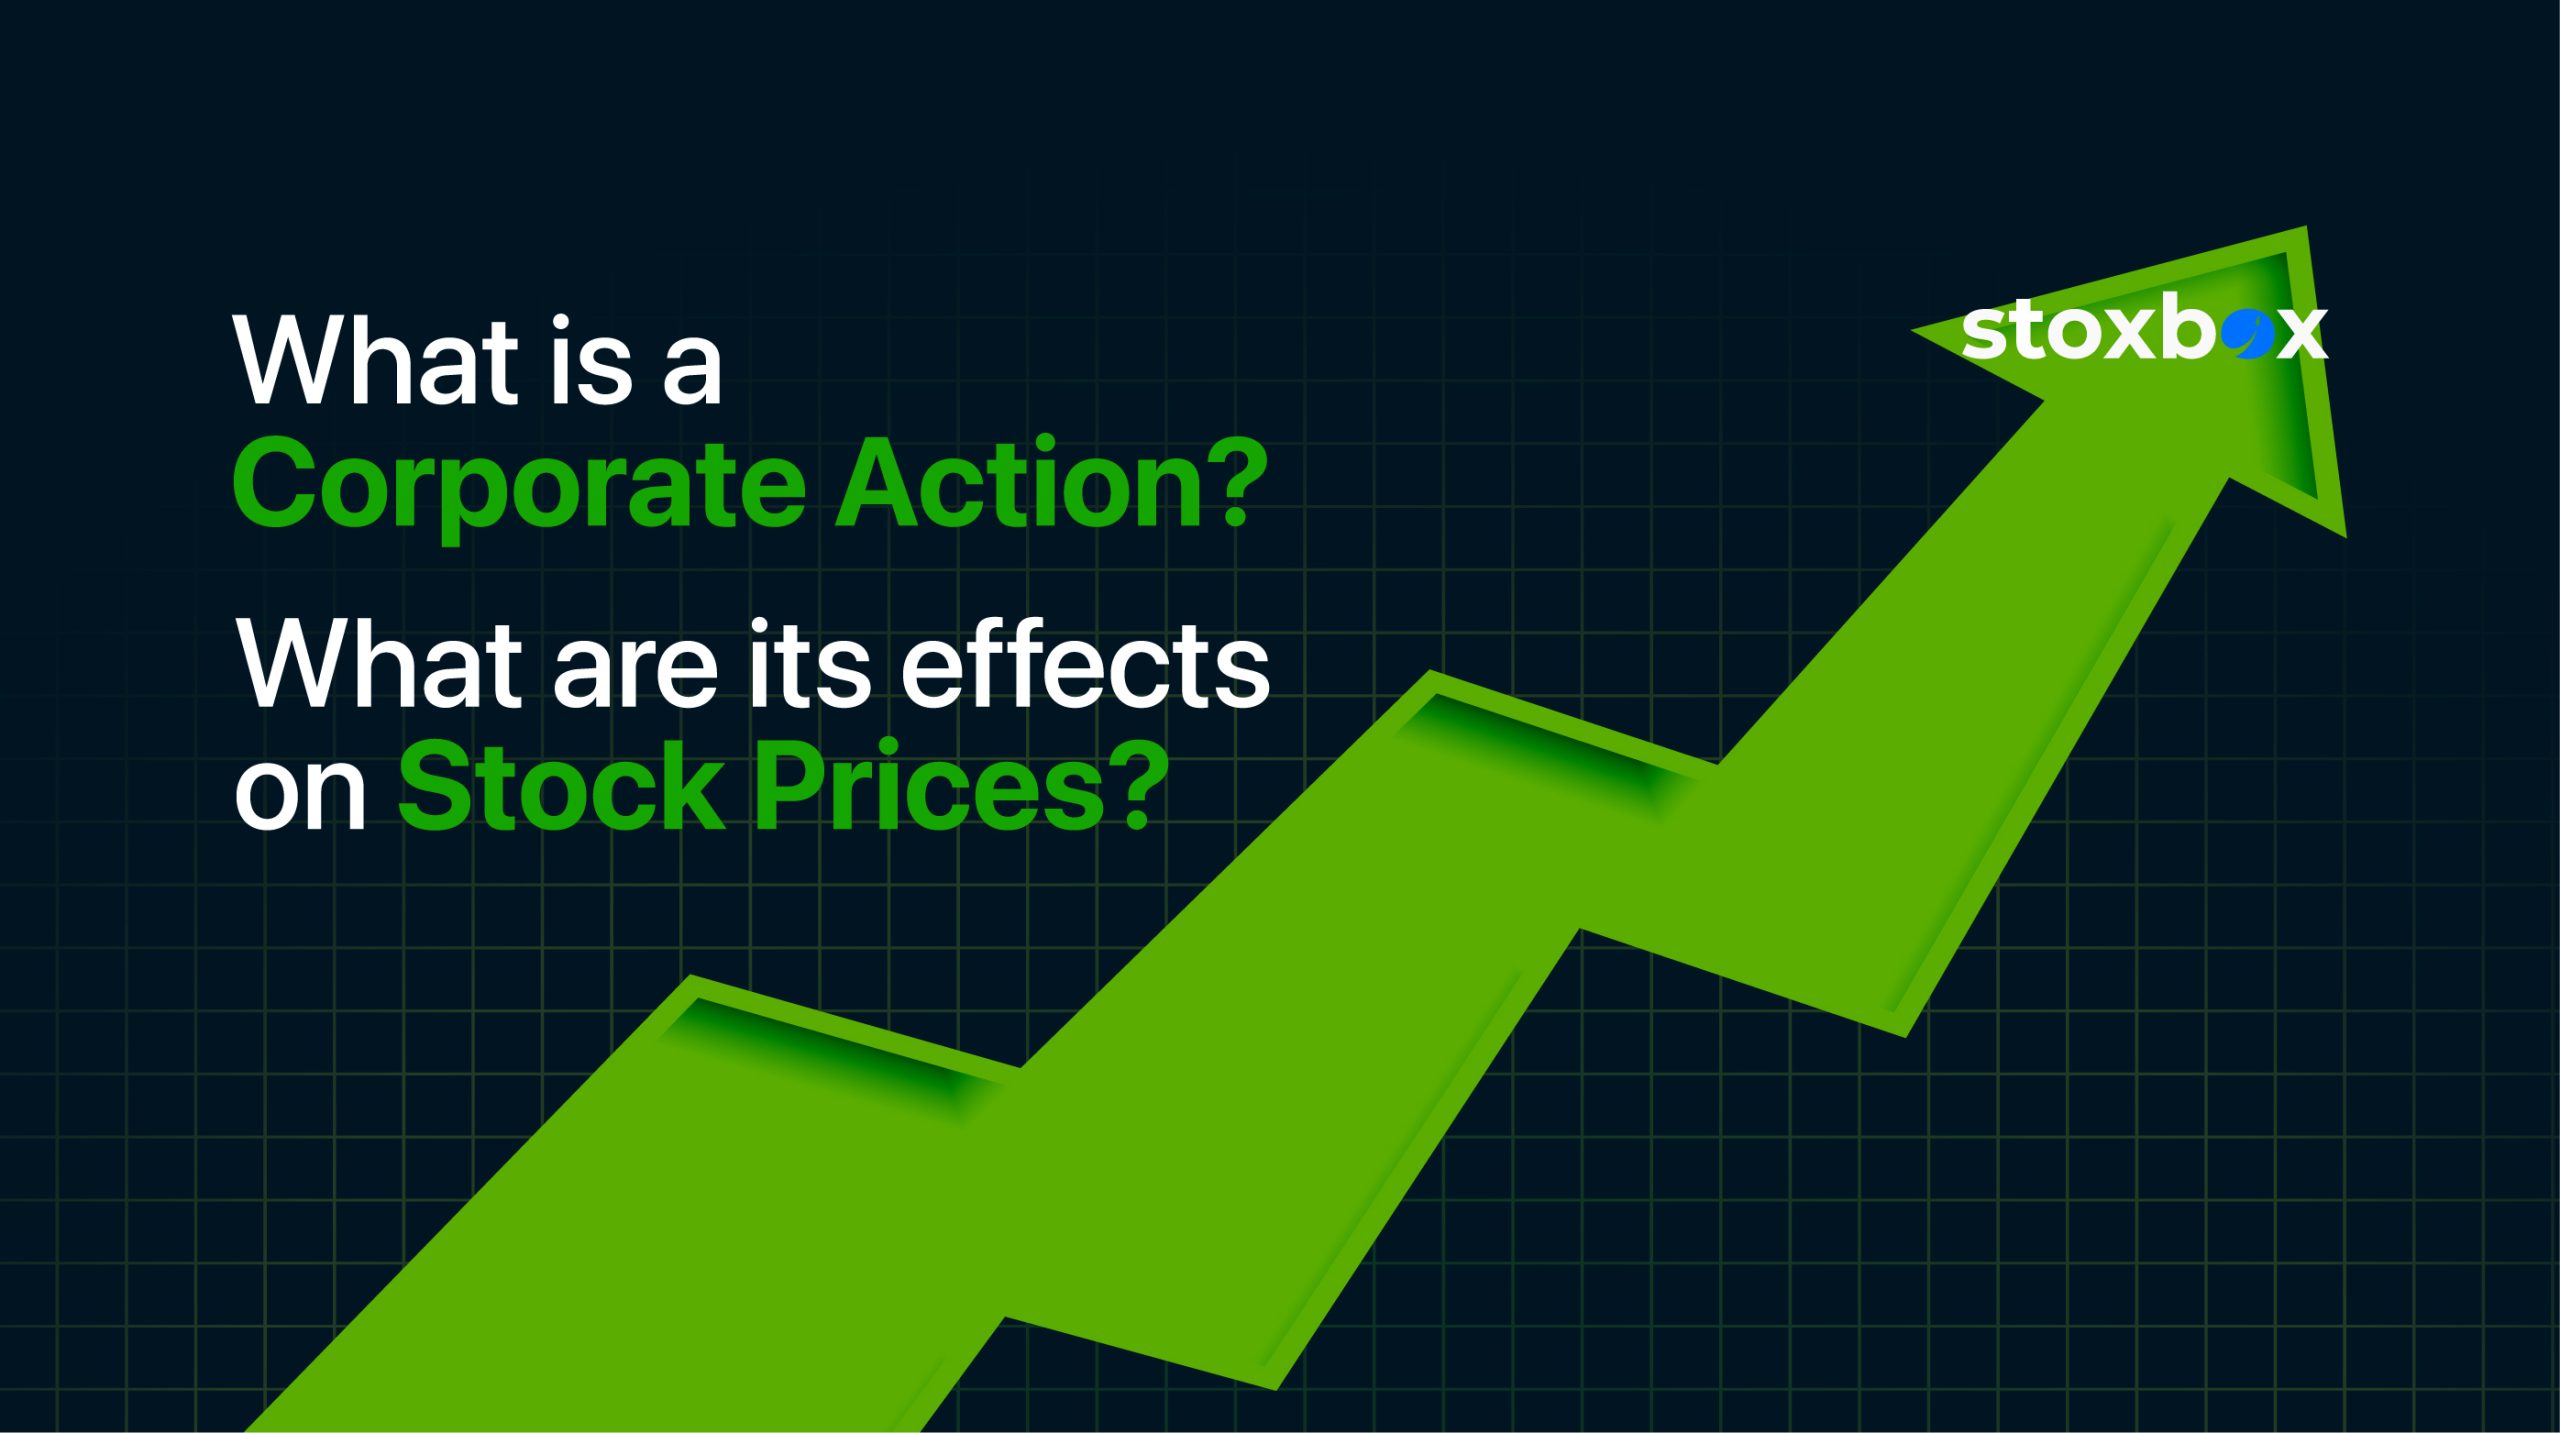 How Corporate Actions Impact Stock Price